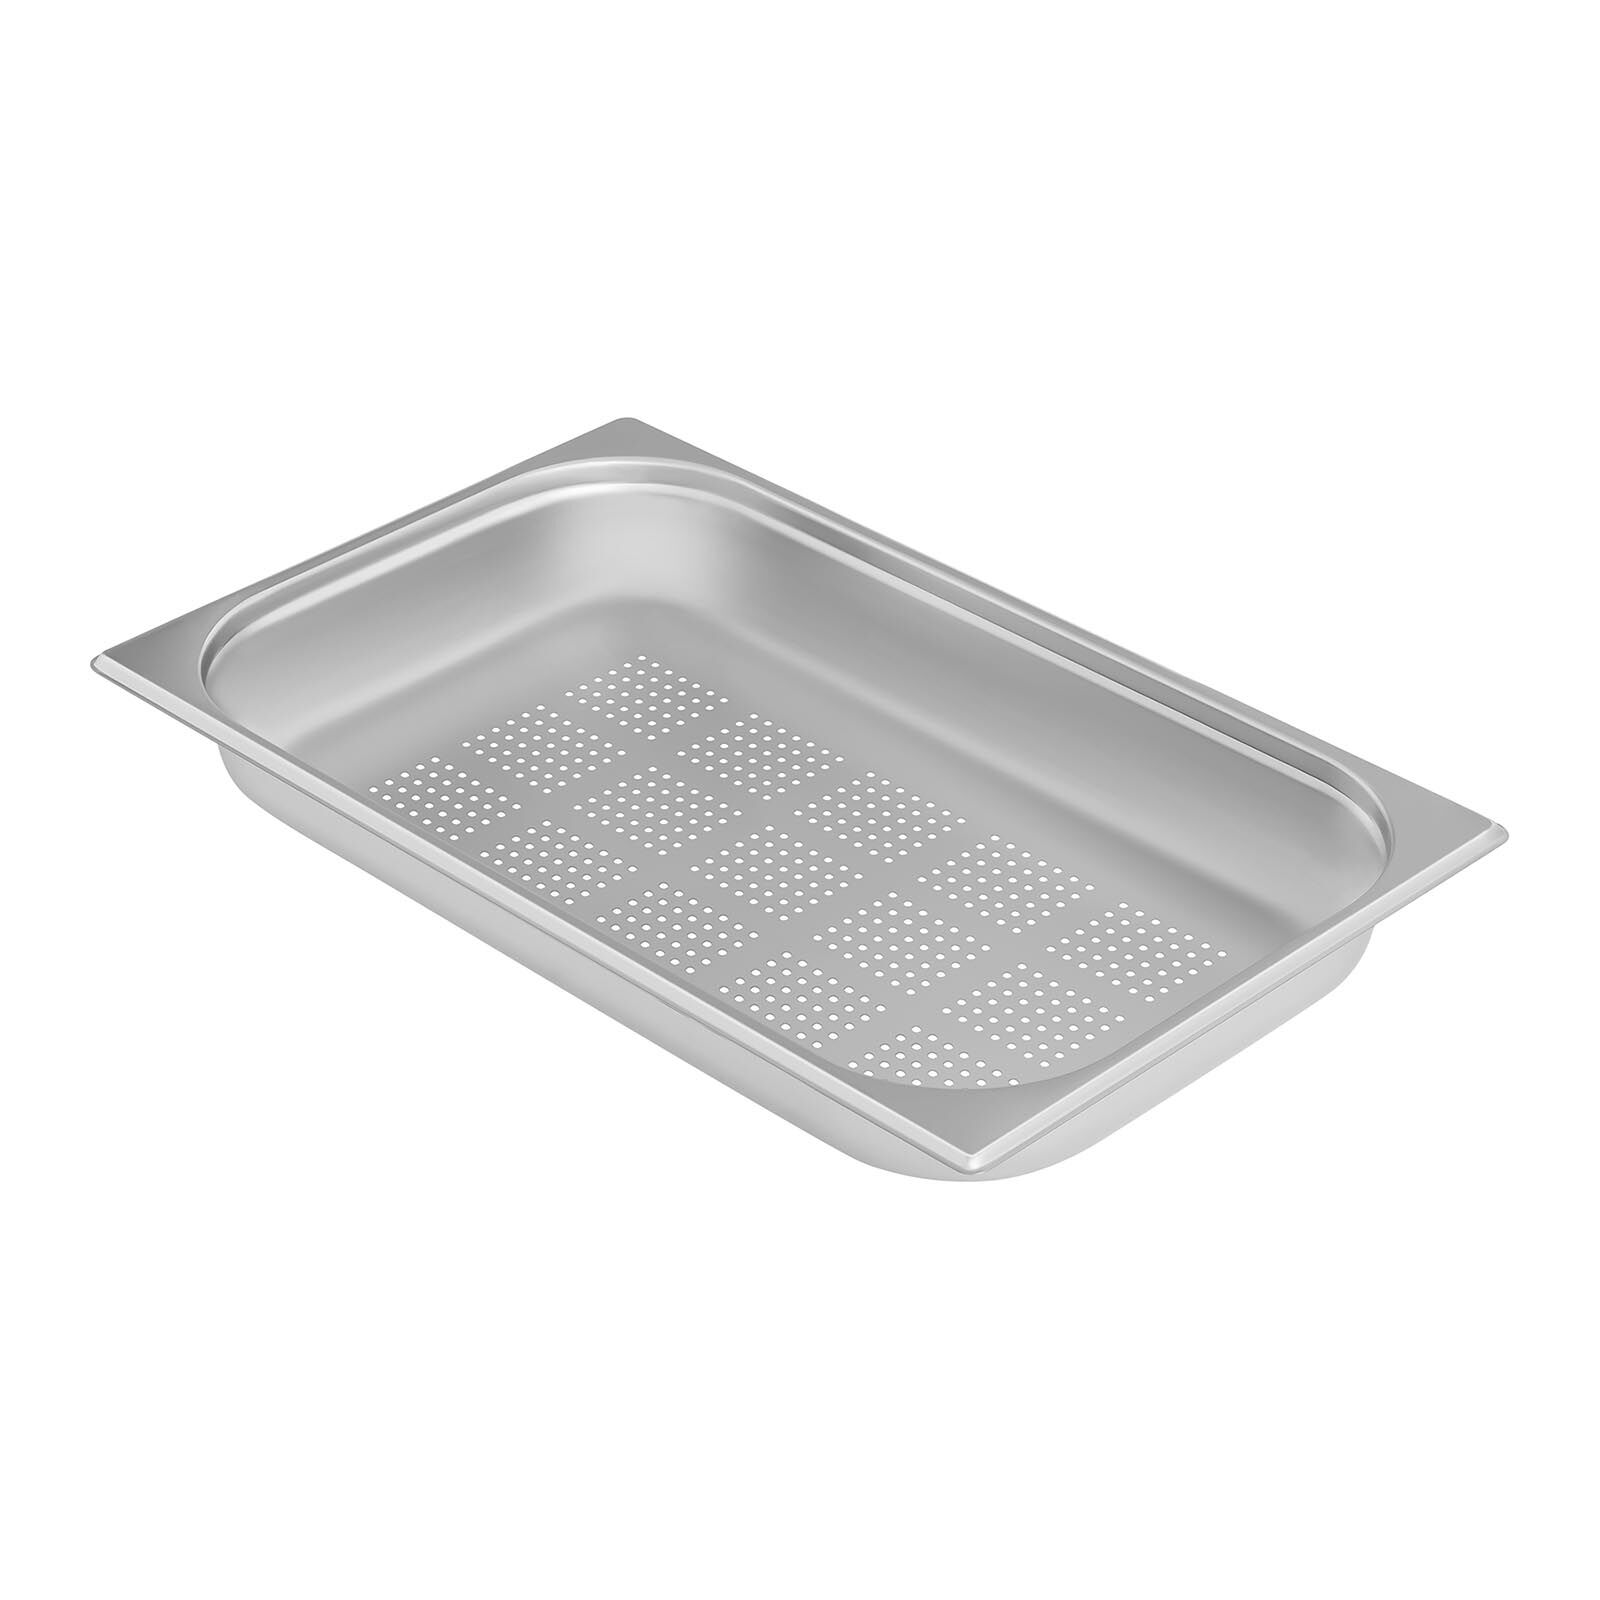 Royal Catering Gastronorm Tray - 1/1 - 65 mm - Perforated